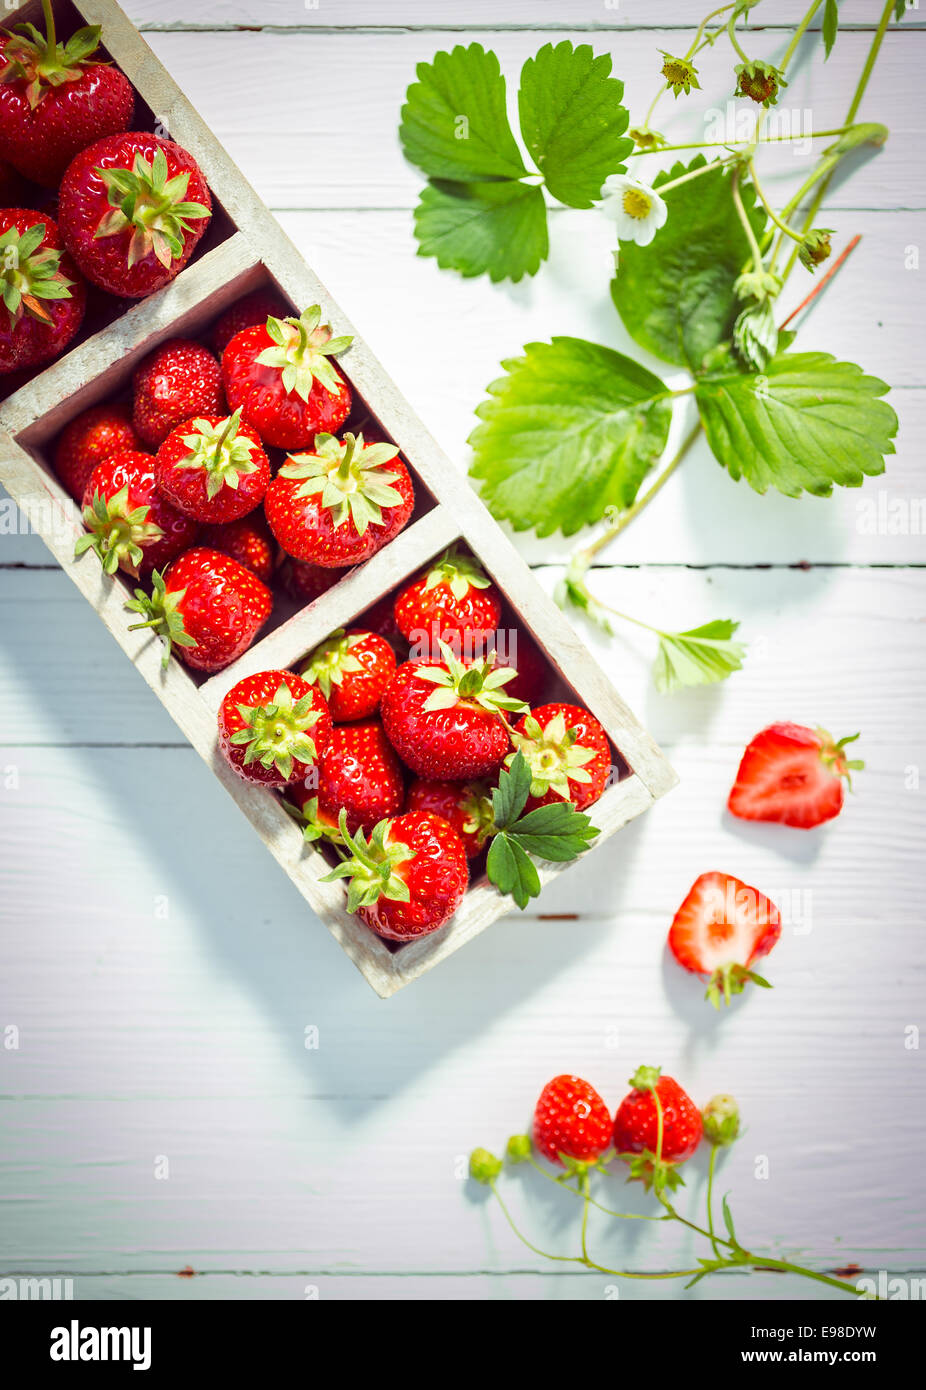 Display of delicious ripe red strawberries in wooden boxes on white painted boards with fresh green leaves and blossom and a halved berry showing the juicy flesh, view from above Stock Photo